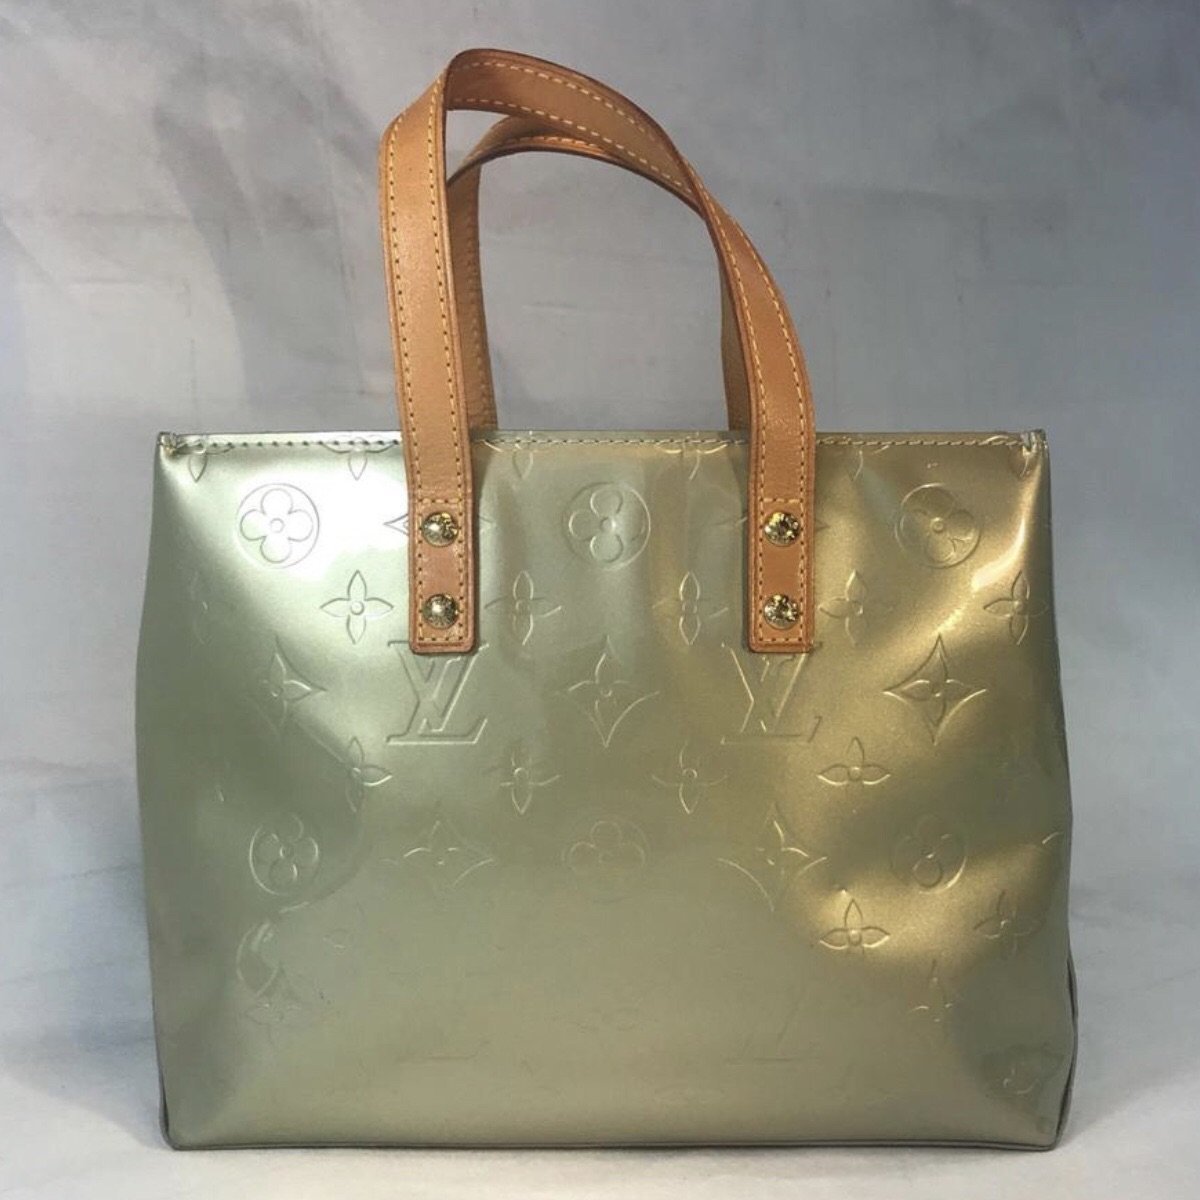 Louis Vuitton Authentic Monogram Vernis READE PM Patent Leather Hand Bag 😘  Tan - $234 (73% Off Retail) - From Ellie